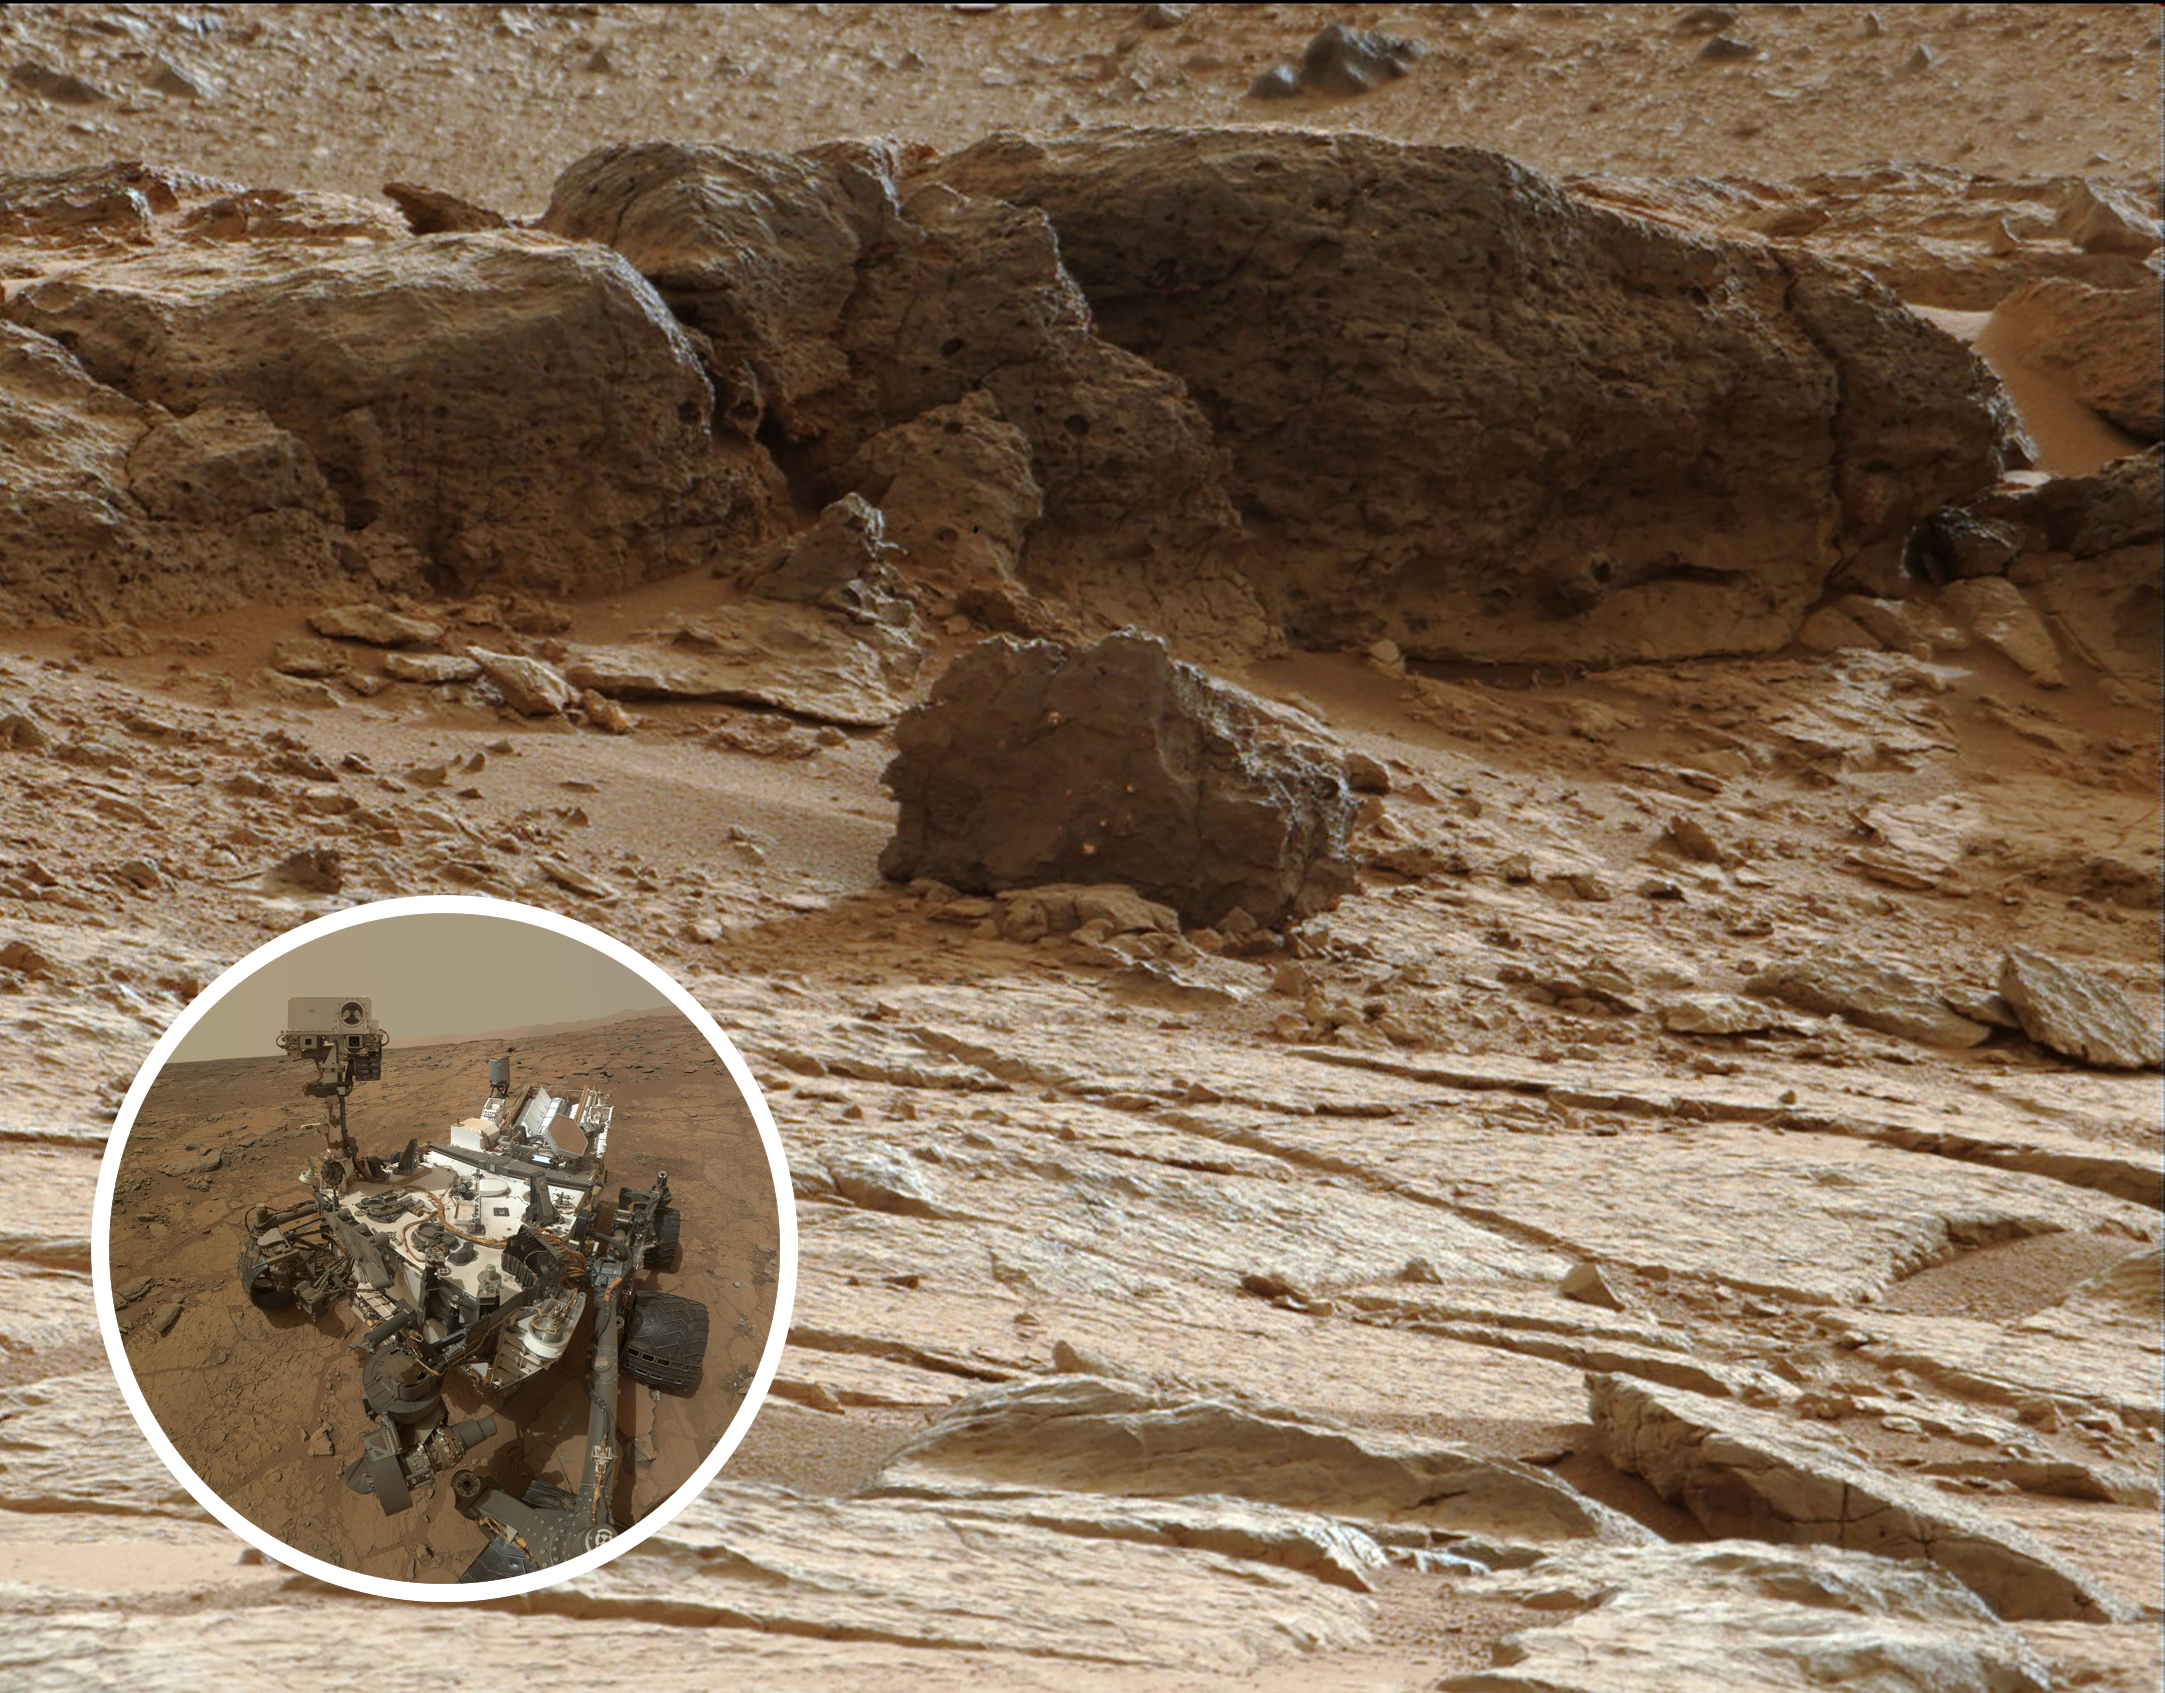 Point Lake Outcrop in Gale Crater (NASA/JPL-Caltech/MSSS), with inset self portrait of Curiosity (NASA/JPL-Caltech/MSSS)